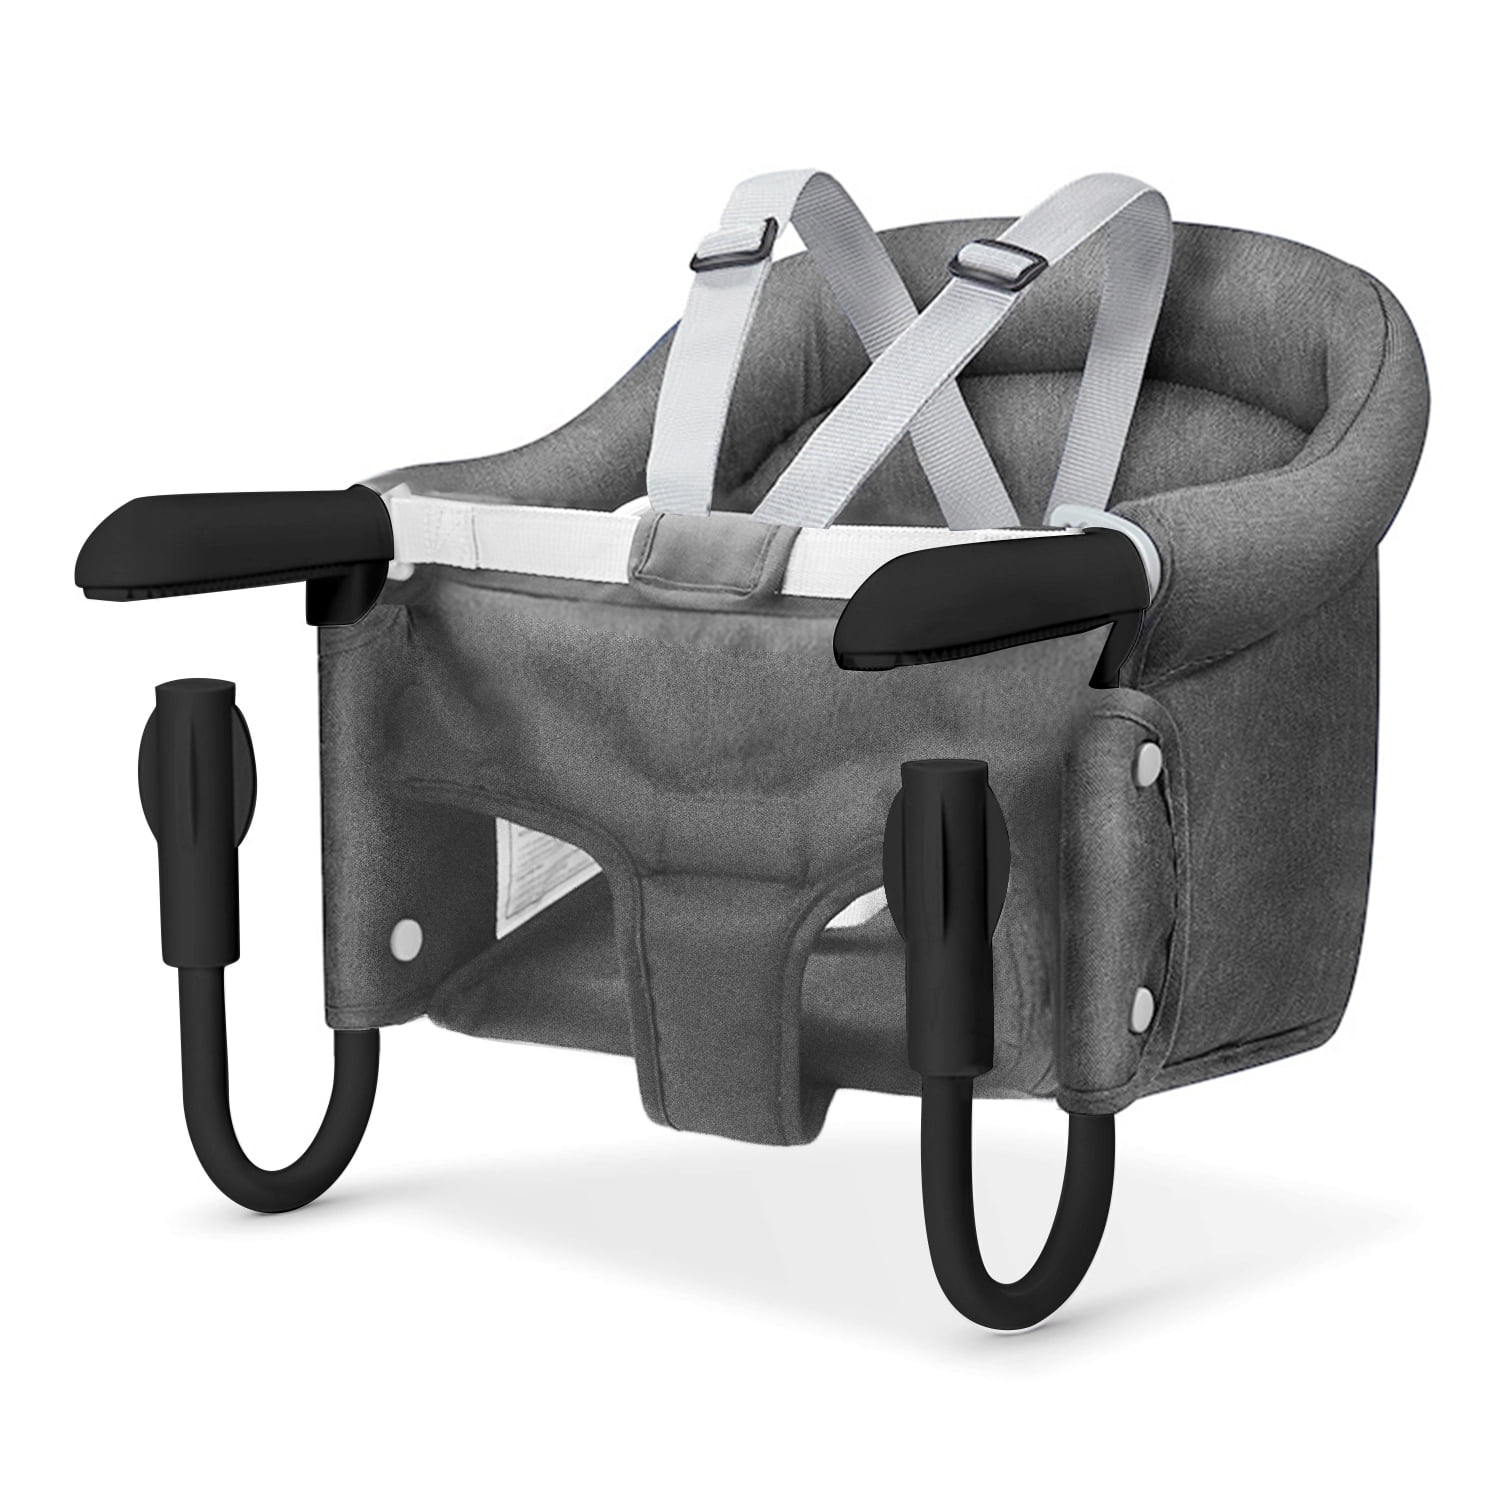 Hook On High Chair Portable Baby Clip, Best Clamp On High Chair